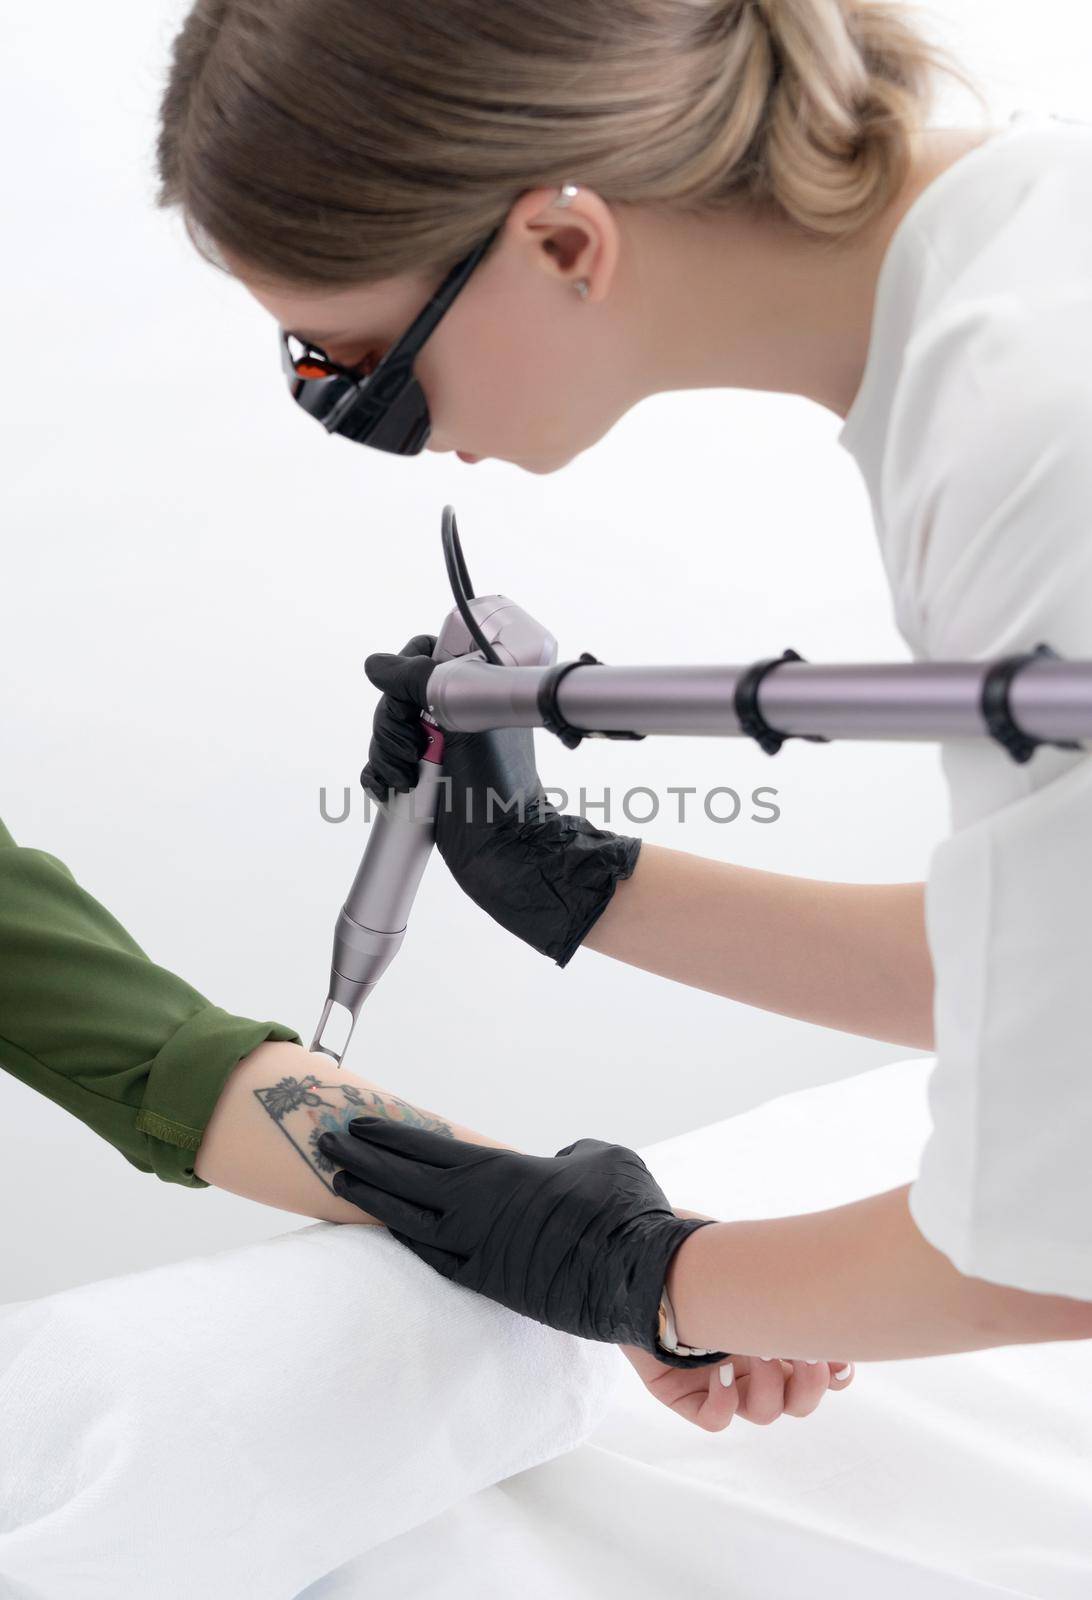 Beautician using laser device to remove an unwanted tattoo from female arm. Concept of erasing tattoos as an expensive procedure in a cosmetology clinic by Mariakray